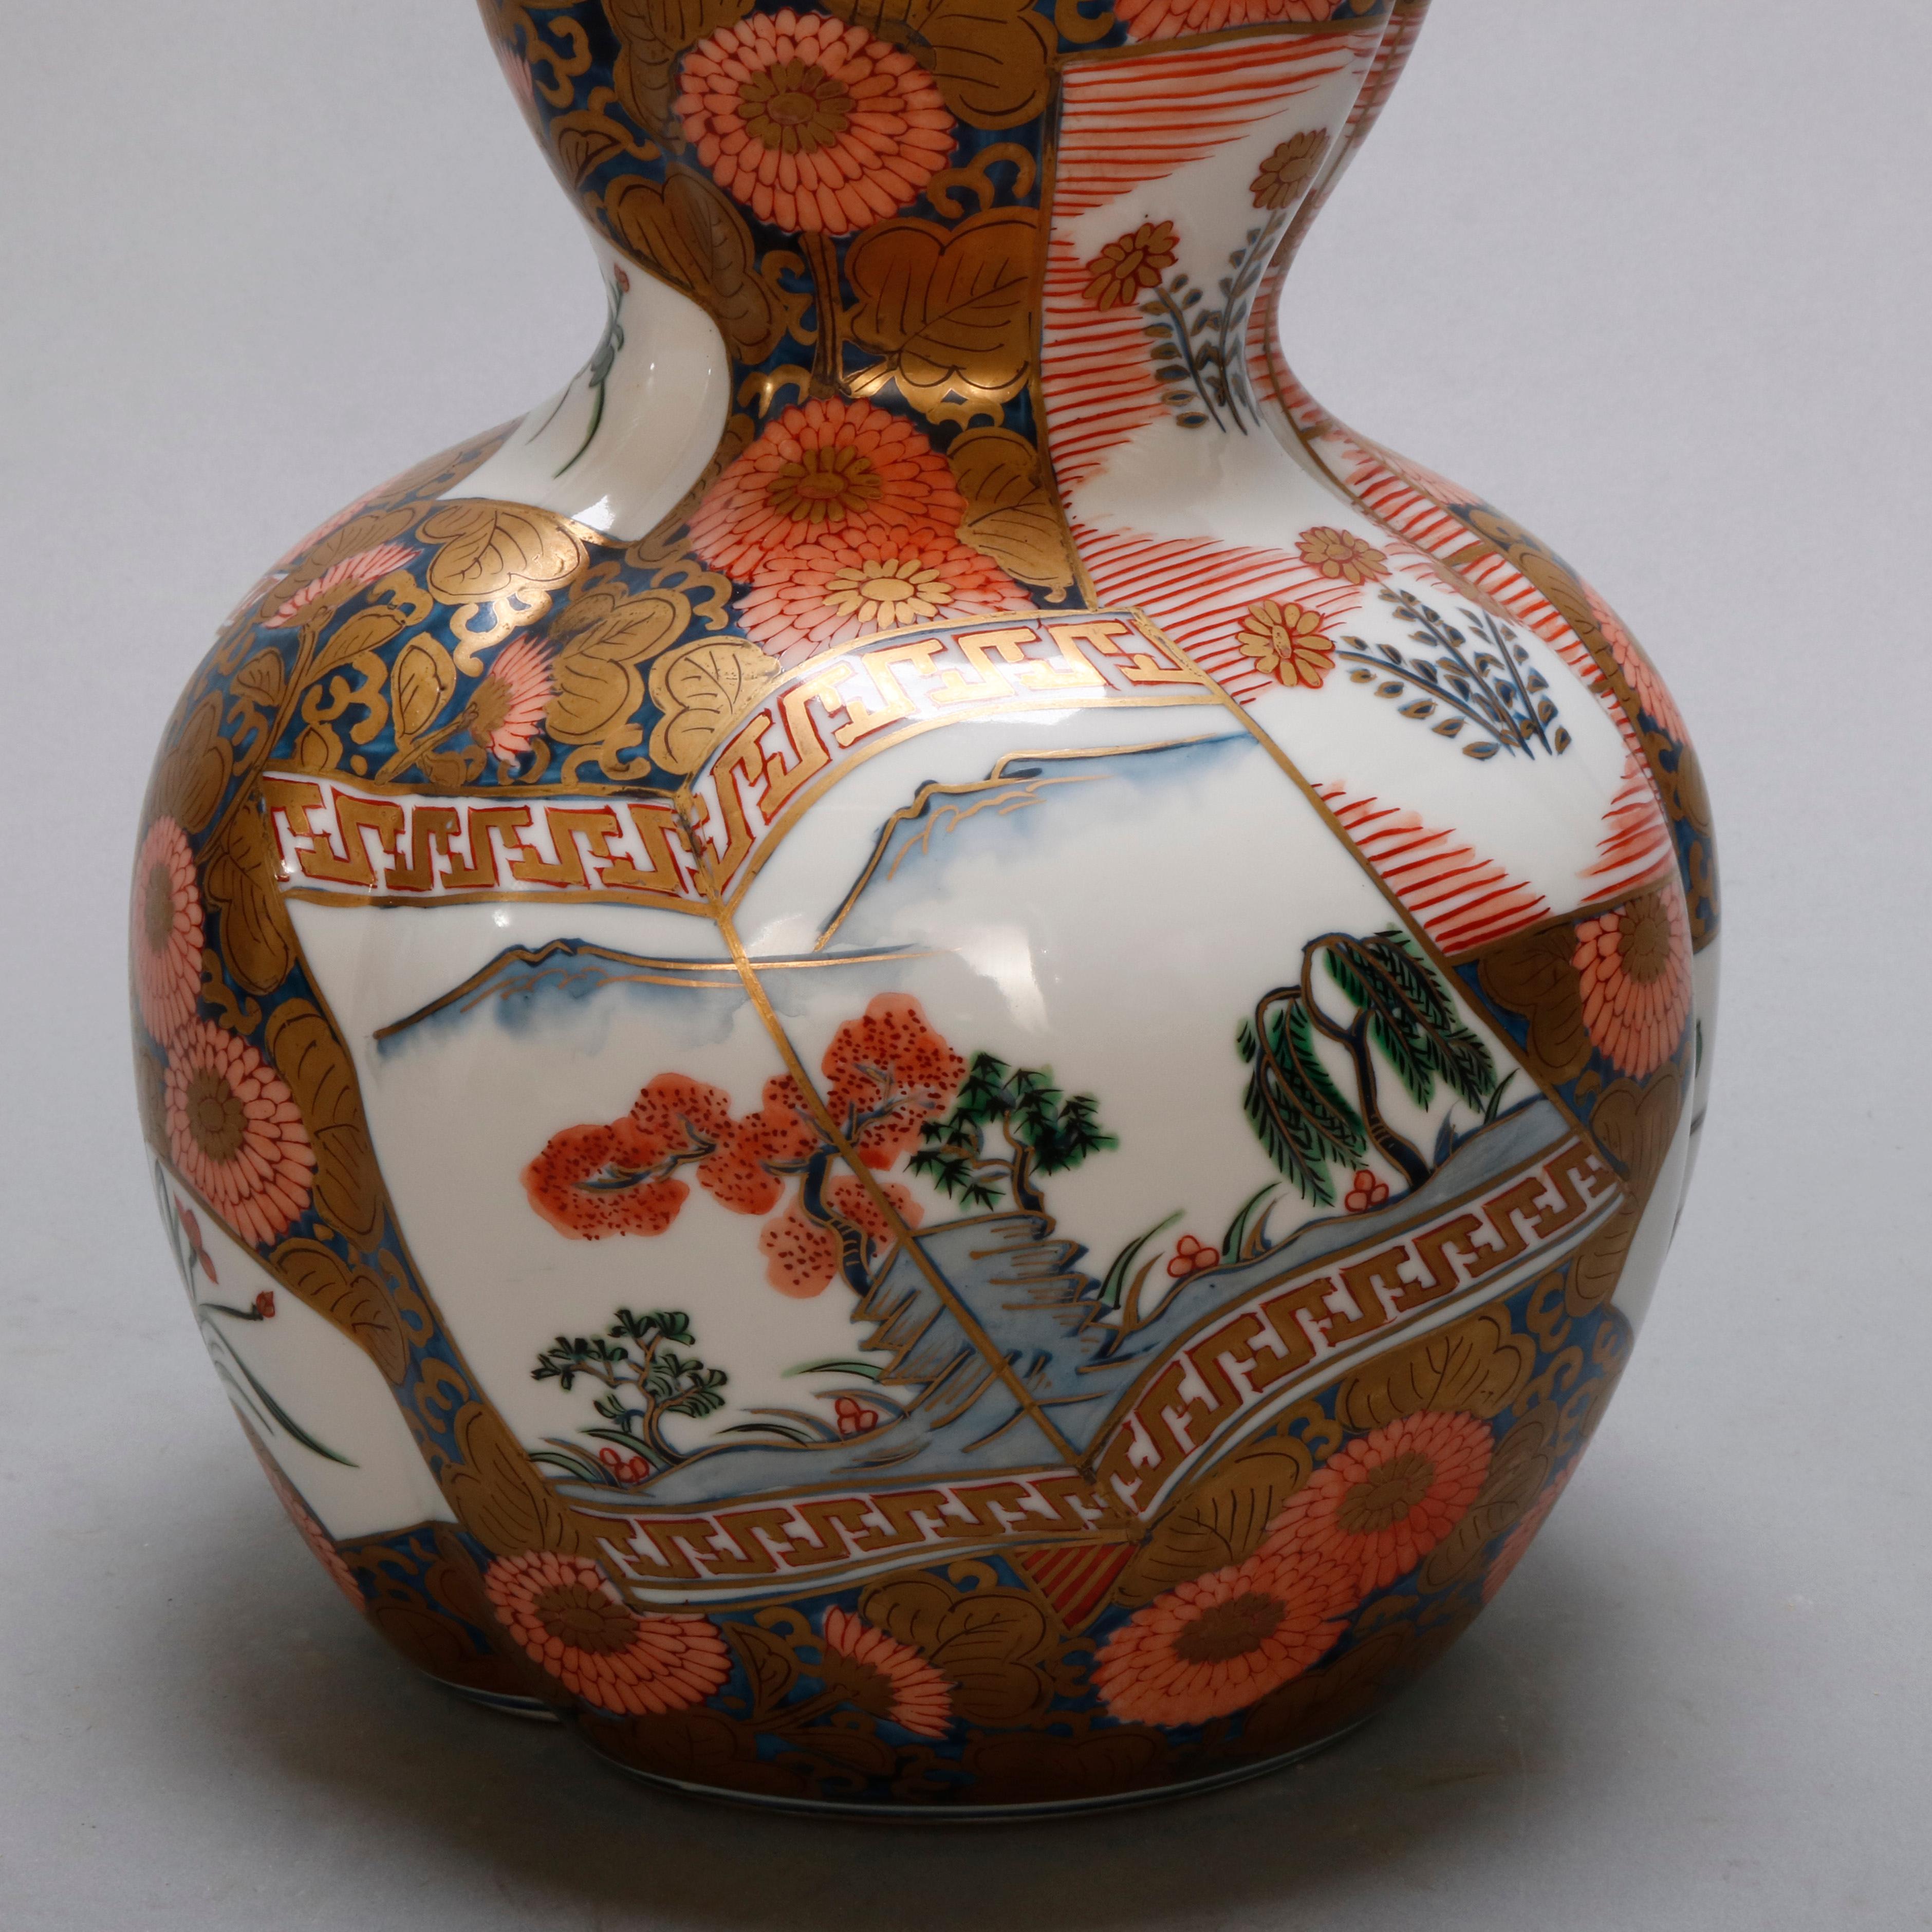 An antique Meiji Imari vase offers porcelain construction in gourd form hand painted with overall figured pattern with stylized floral elements and reserves depicting landscape scenes, signed on base as photographed, circa 1900.

Measures - 14.75